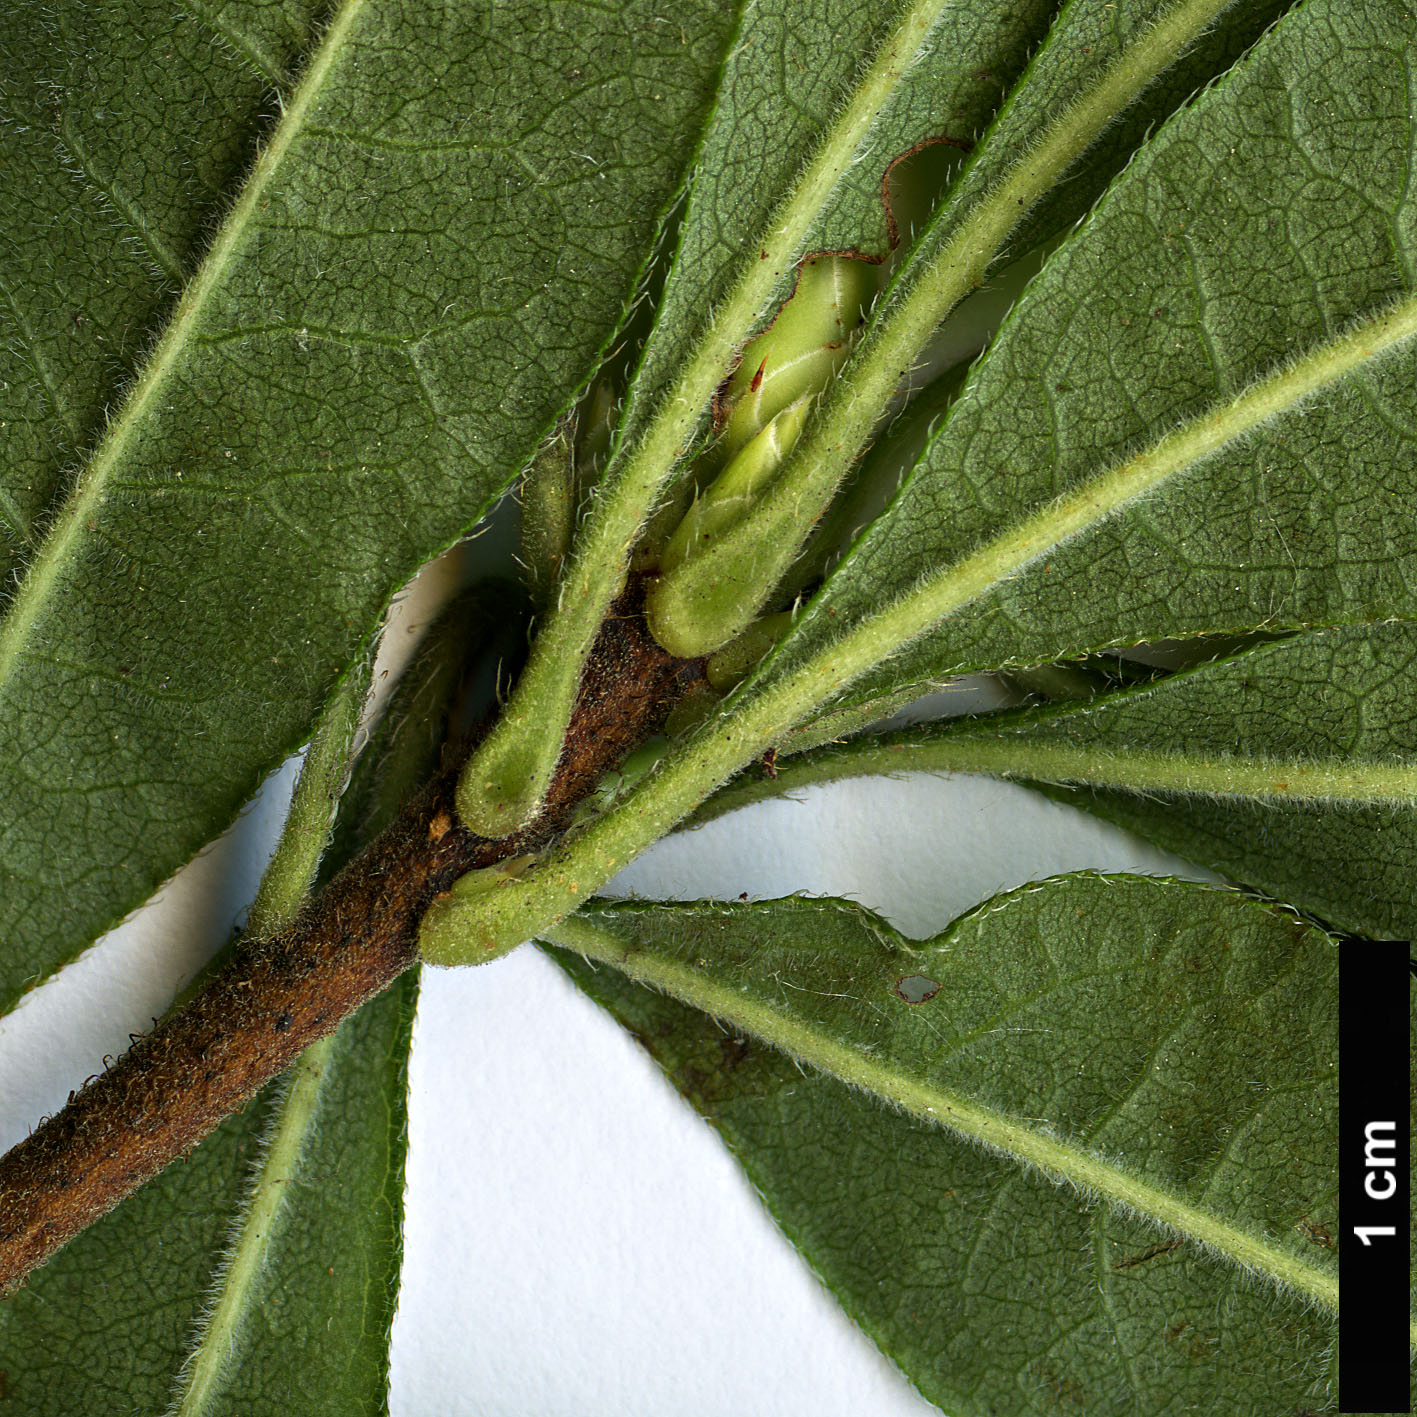 High resolution image: Family: Ericaceae - Genus: Rhododendron - Taxon: eastmanii